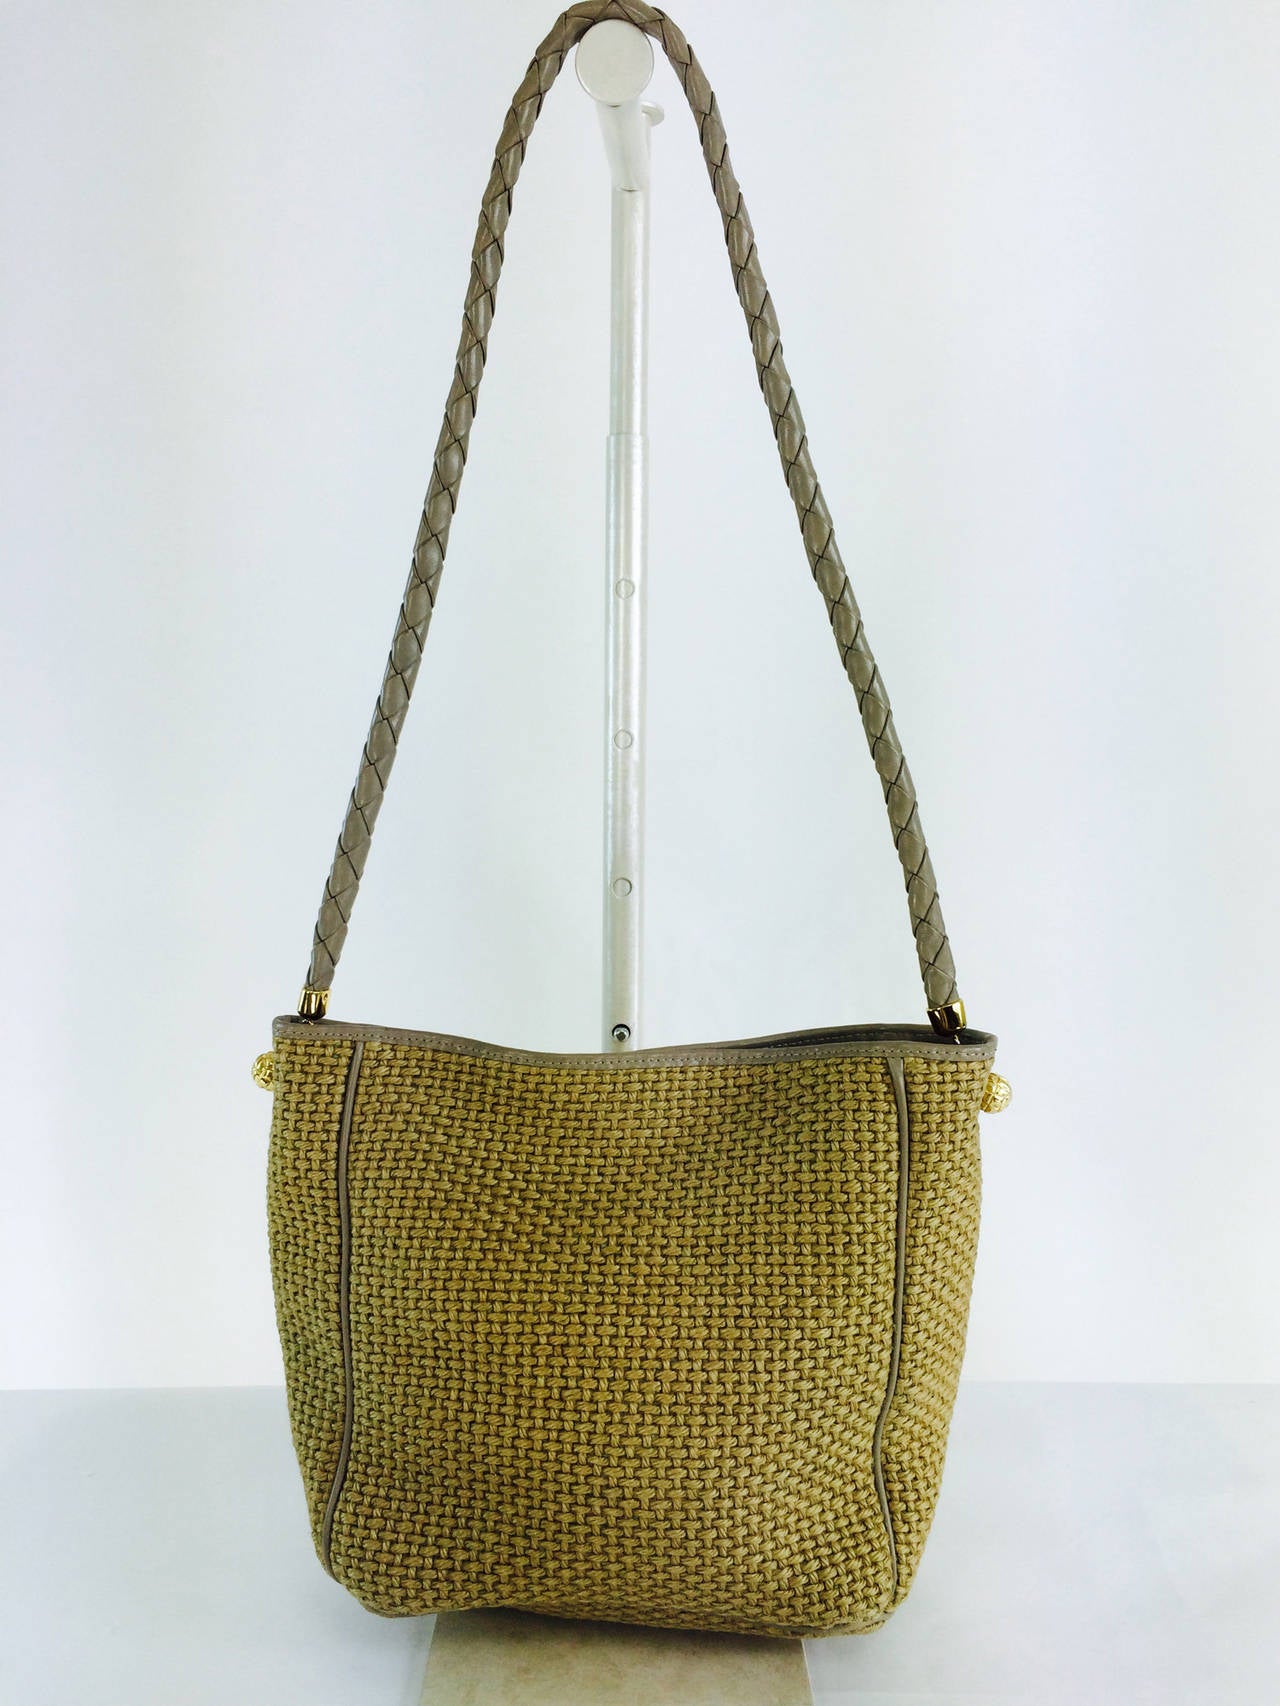 Bottega Veneta neutral woven jute & leather shoulder bag, woven leather shoulder strap, with leather cording on the body of the bag...Gold trimmings...Facings lined in leather, body of interior lined in coated fabric...There is a side zipper